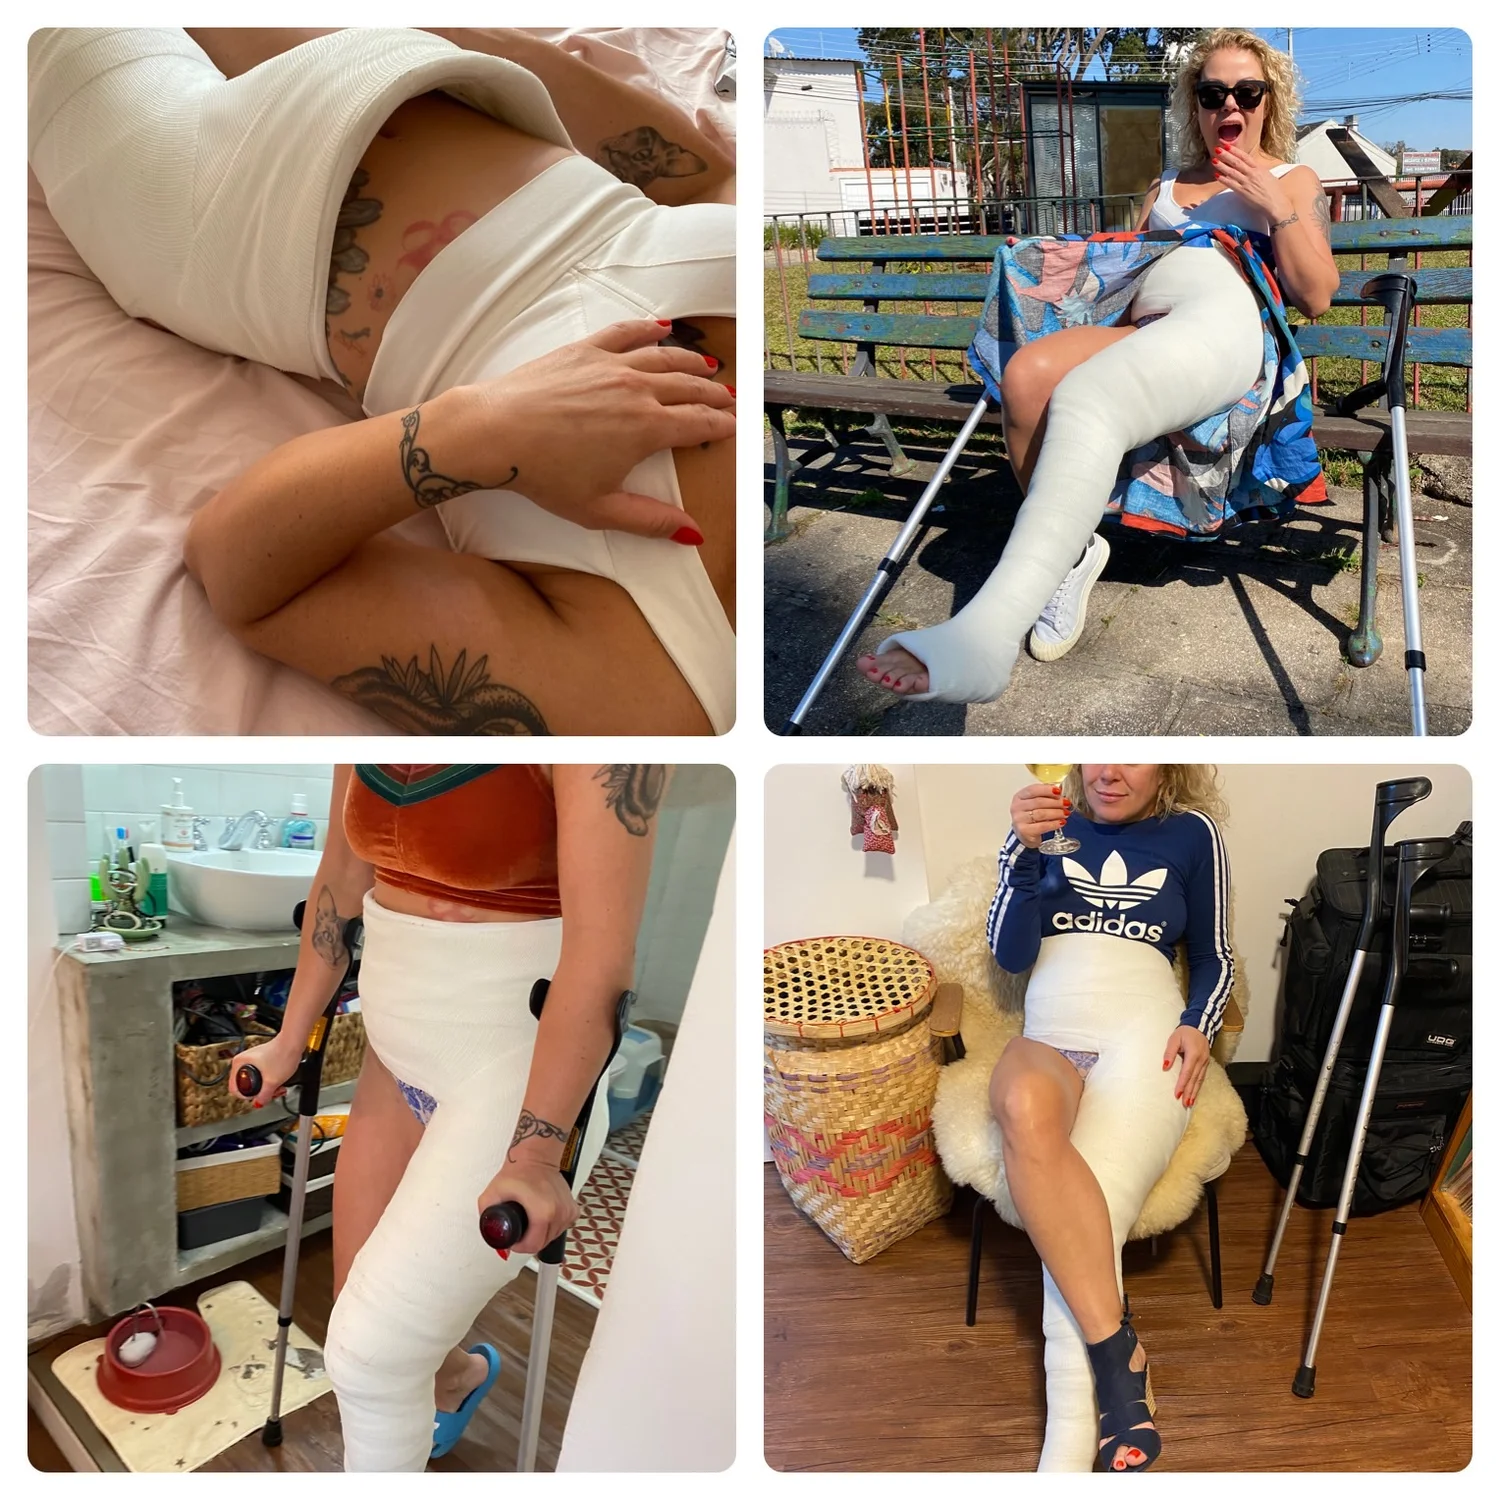 First time I have used a HIP SPICA CAST, it was perfect, white and very comfortable. And it accompanied me for two days in indoor and outdoor videos! A really cool original material from a girl in a cast!